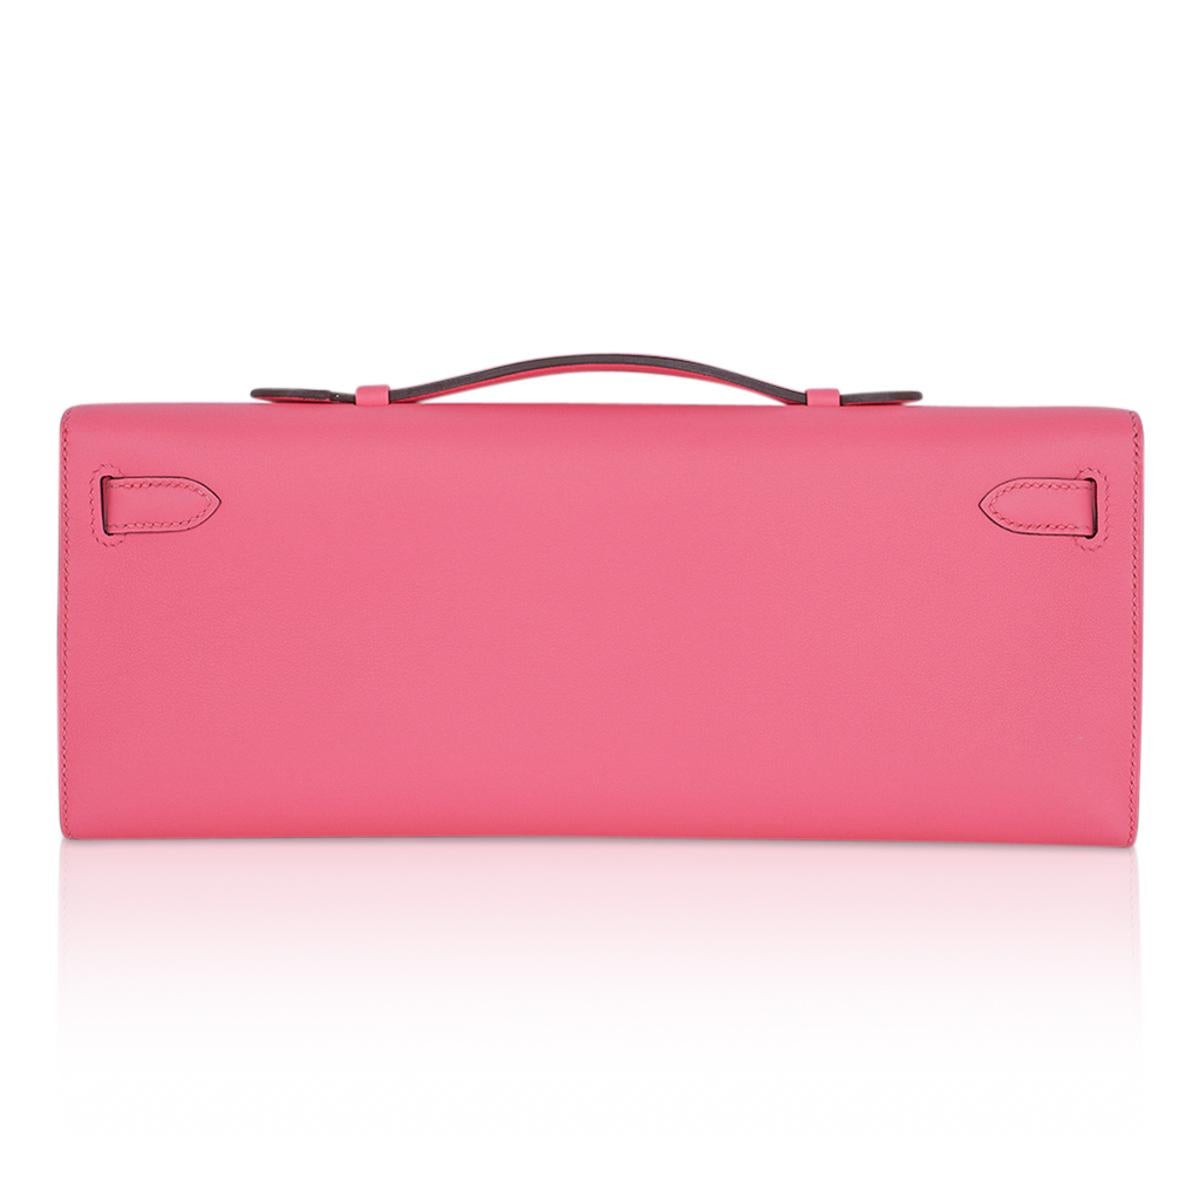 Hermes Kelly Cut Rose Azalee Clutch Bag Swift Palladium Hardware New In New Condition For Sale In Miami, FL